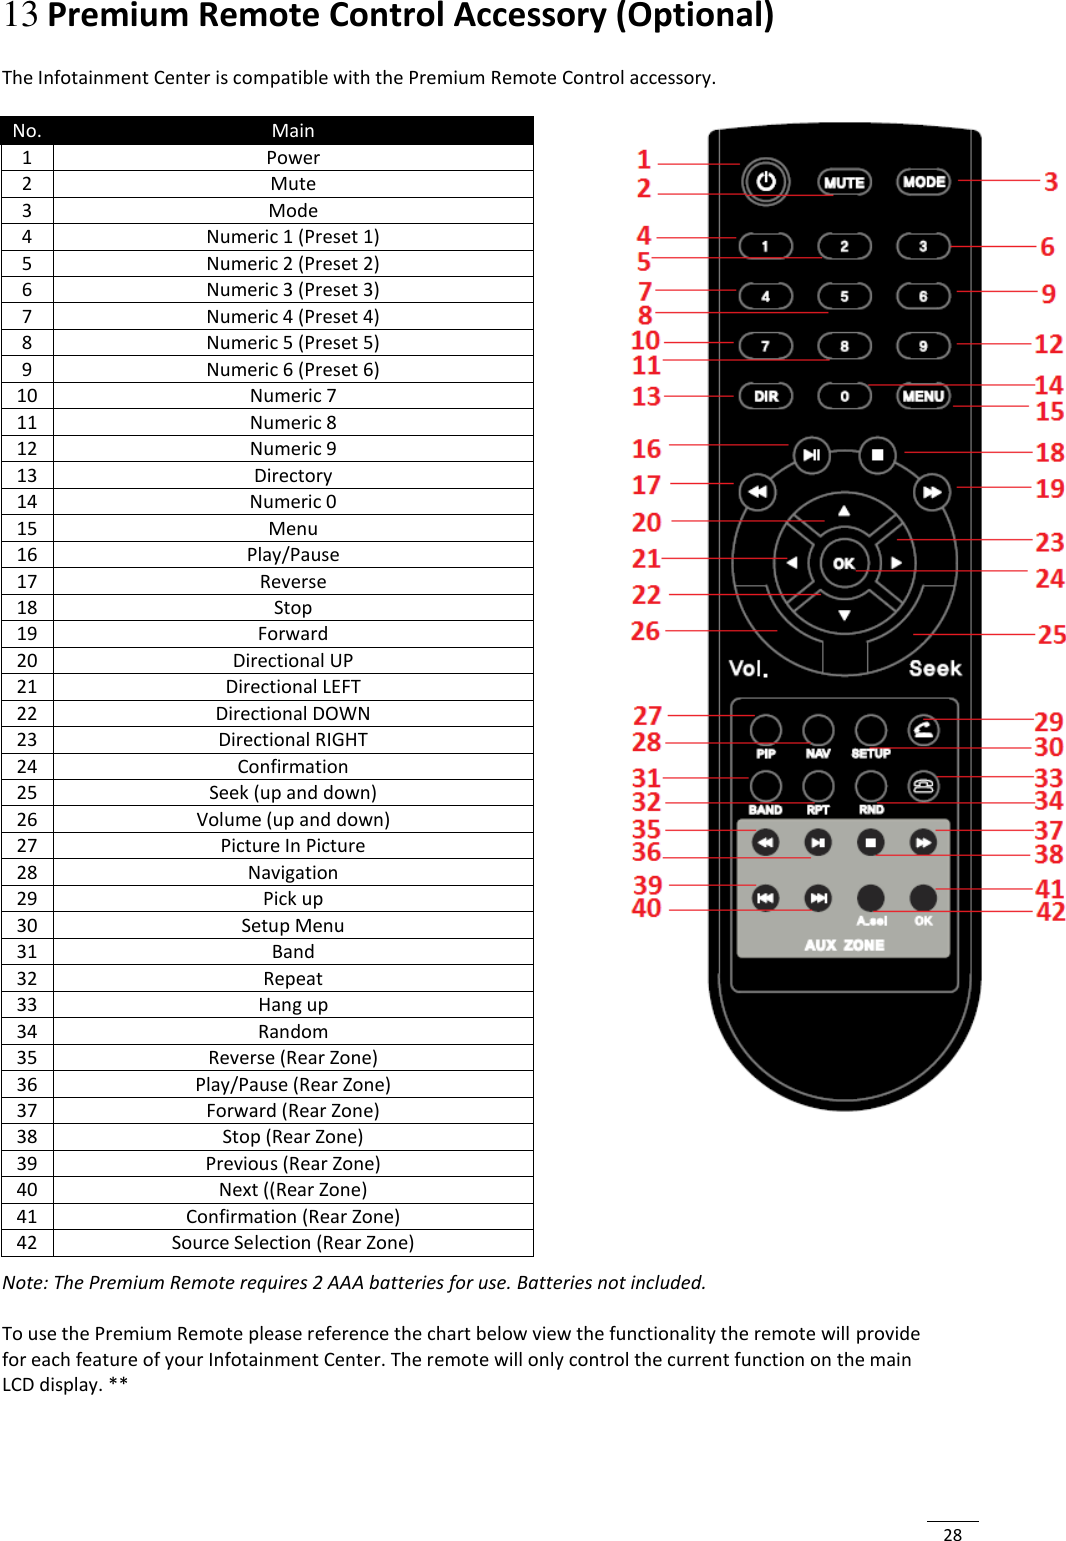  28 13 Premium Remote Control Accessory (Optional)  The Infotainment Center is compatible with the Premium Remote Control accessory.          Note: The Premium Remote requires 2 AAA batteries for use. Batteries not included.  To use the Premium Remote please reference the chart below view the functionality the remote will provide for each feature of your Infotainment Center. The remote will only control the current function on the main LCD display. **    No. Main 1 Power  2 Mute 3 Mode 4 Numeric 1 (Preset 1) 5 Numeric 2 (Preset 2) 6 Numeric 3 (Preset 3) 7 Numeric 4 (Preset 4) 8 Numeric 5 (Preset 5) 9 Numeric 6 (Preset 6) 10 Numeric 7  11 Numeric 8  12 Numeric 9  13 Directory 14 Numeric 0 15 Menu 16 Play/Pause 17 Reverse 18 Stop 19 Forward 20 Directional UP 21 Directional LEFT 22 Directional DOWN 23 Directional RIGHT 24 Confirmation 25 Seek (up and down) 26 Volume (up and down) 27 Picture In Picture 28 Navigation 29 Pick up 30 Setup Menu 31 Band 32 Repeat 33 Hang up 34 Random 35 Reverse (Rear Zone) 36 Play/Pause (Rear Zone) 37 Forward (Rear Zone) 38 Stop (Rear Zone) 39 Previous (Rear Zone) 40 Next ((Rear Zone) 41 Confirmation (Rear Zone) 42 Source Selection (Rear Zone) 